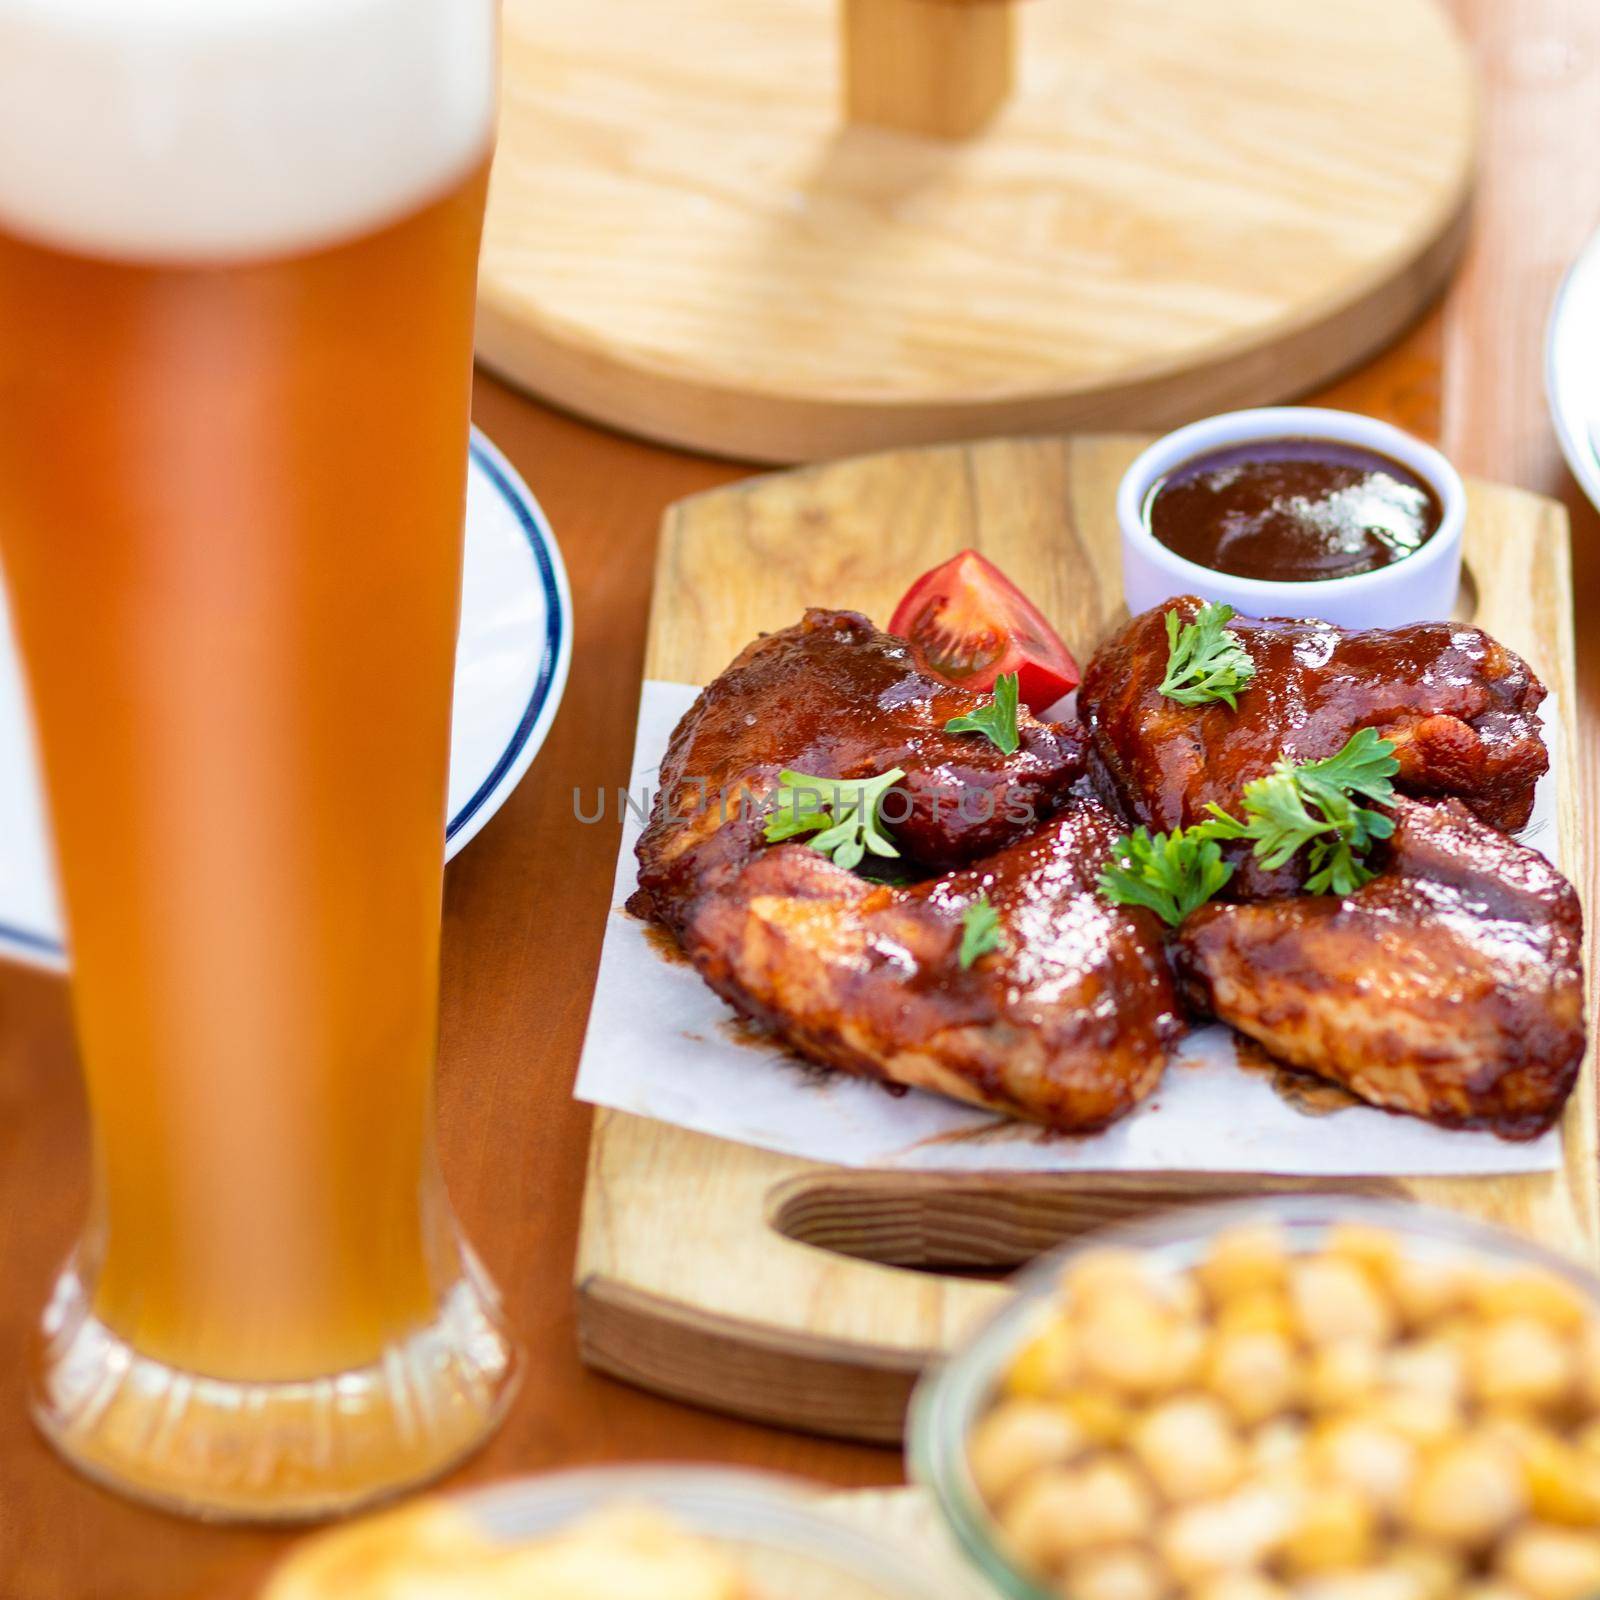 Barbecue chicken meal with beer and sauce by ferhad